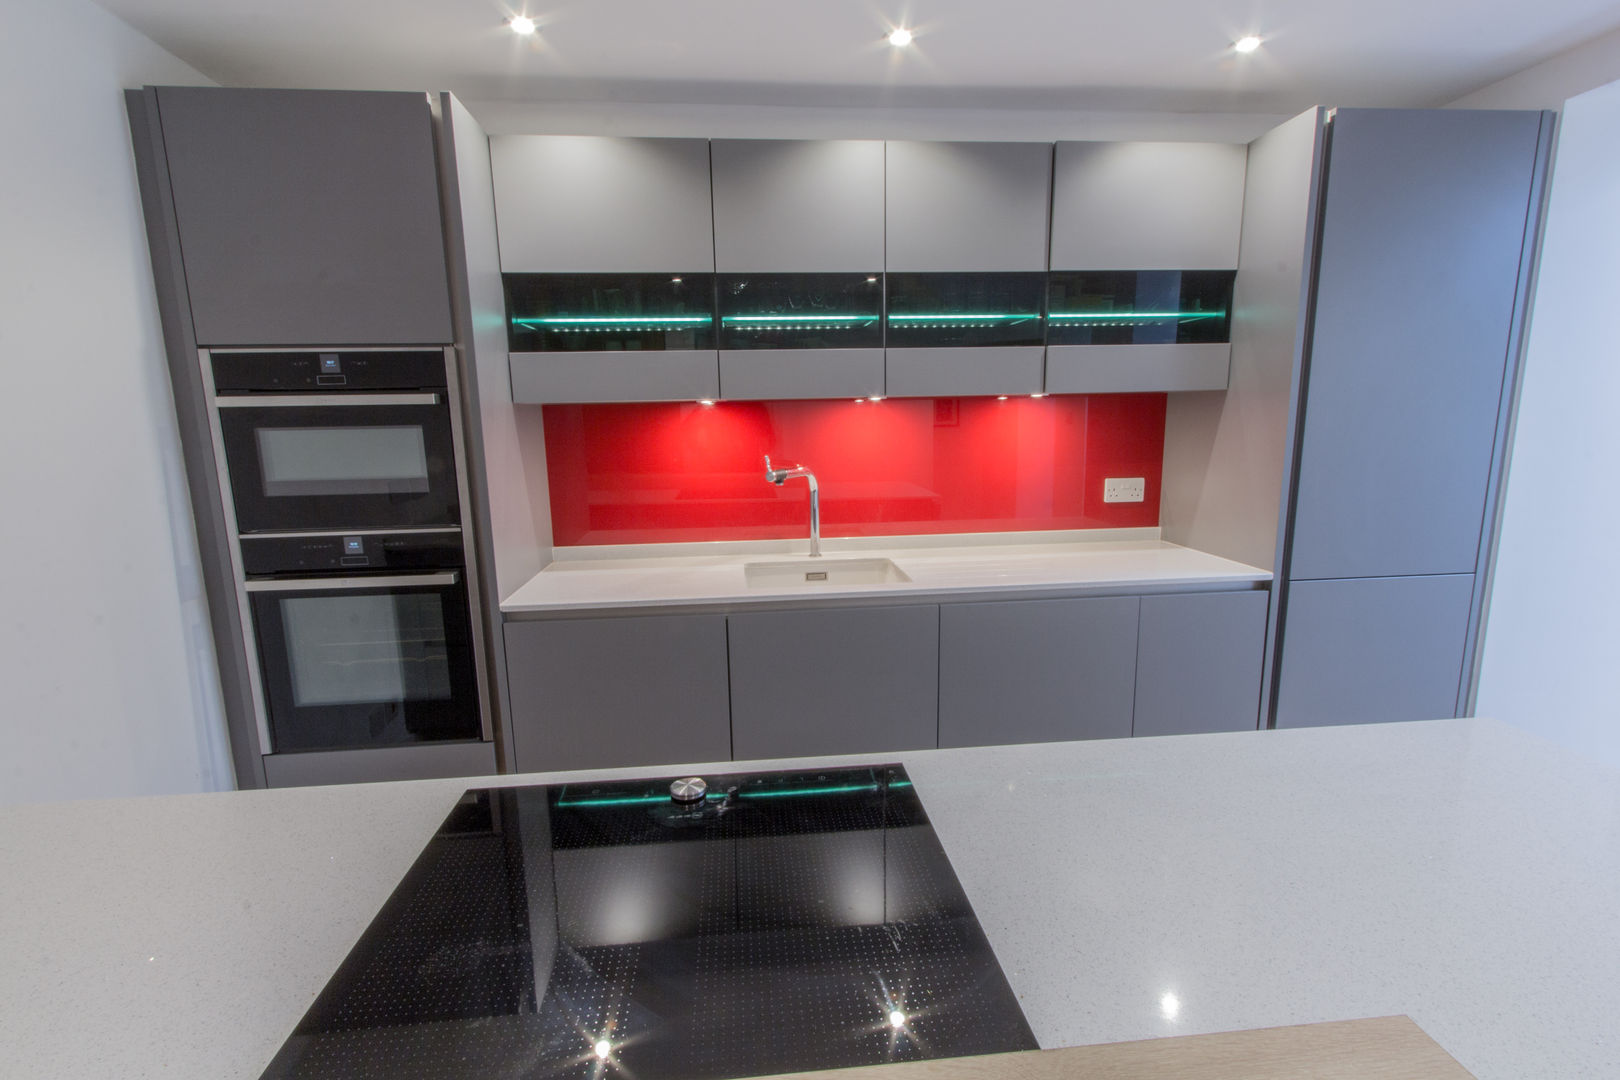 Grey & Red Eco German Kitchens Cocinas de estilo moderno Tablero DM Nobilia,Twinkle White worktops,Neff oven,Neff combination microwave,Blanco sink and tap,Neff Induction hob,open plan galley style kitchen,glazed wall units